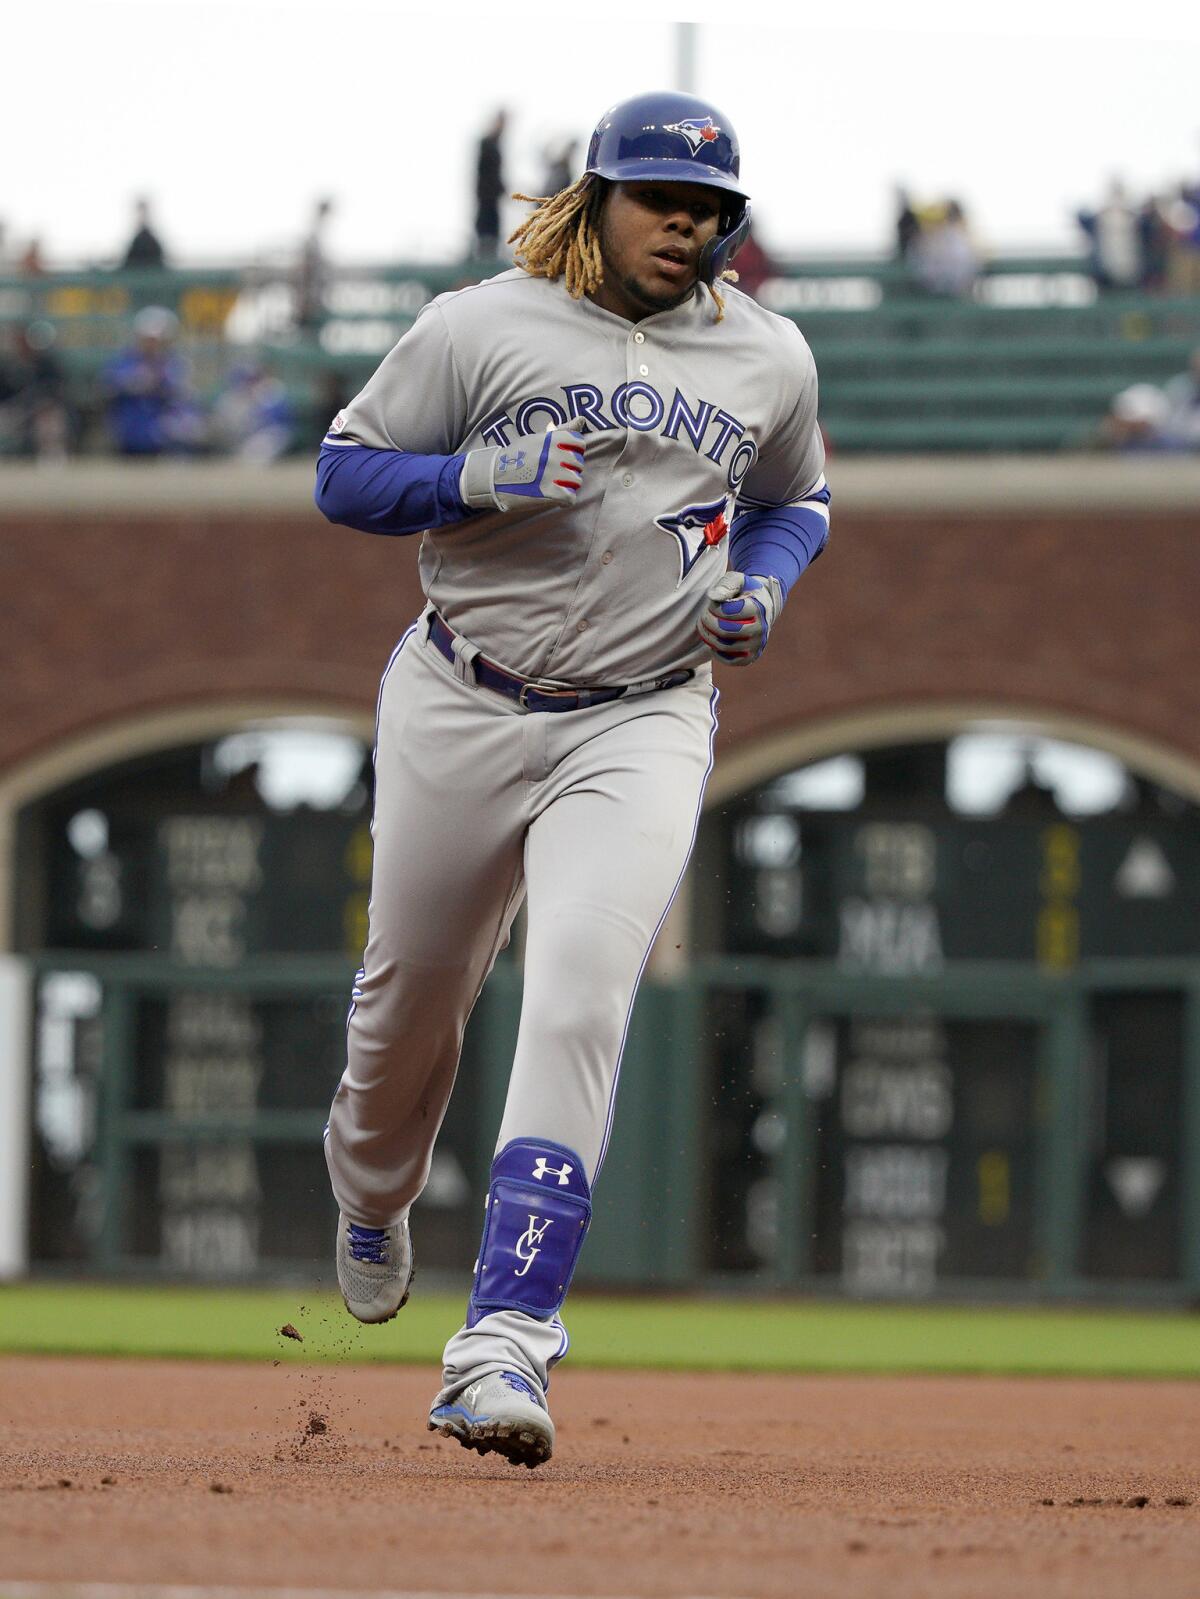 Vladdy Jr. hits first 2 HRs, youngest Blue Jay to go deep - The